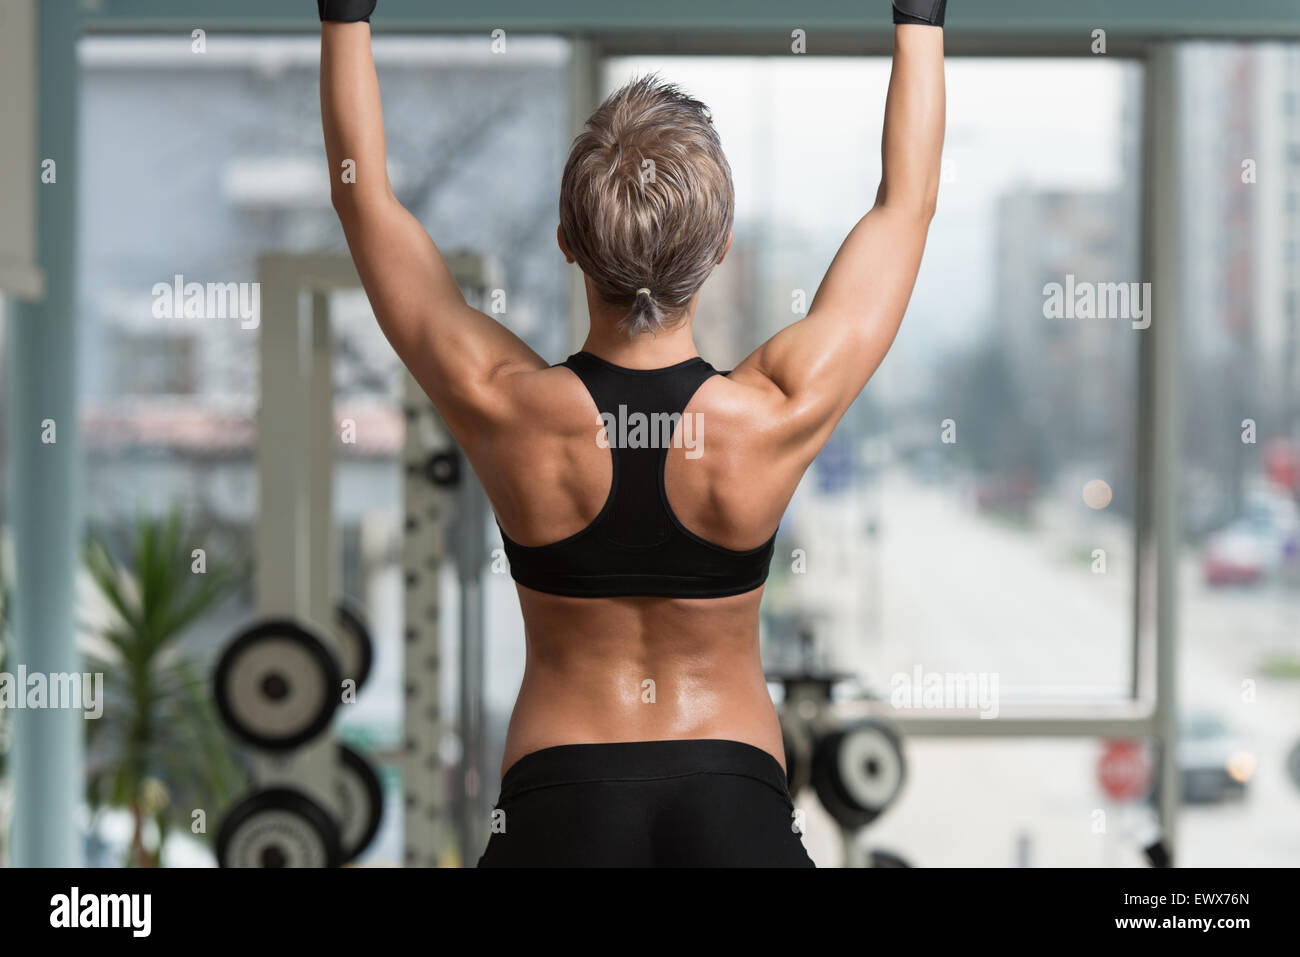 Muscular woman in gym showing back muscles. - Stock Photo [88157617] -  PIXTA